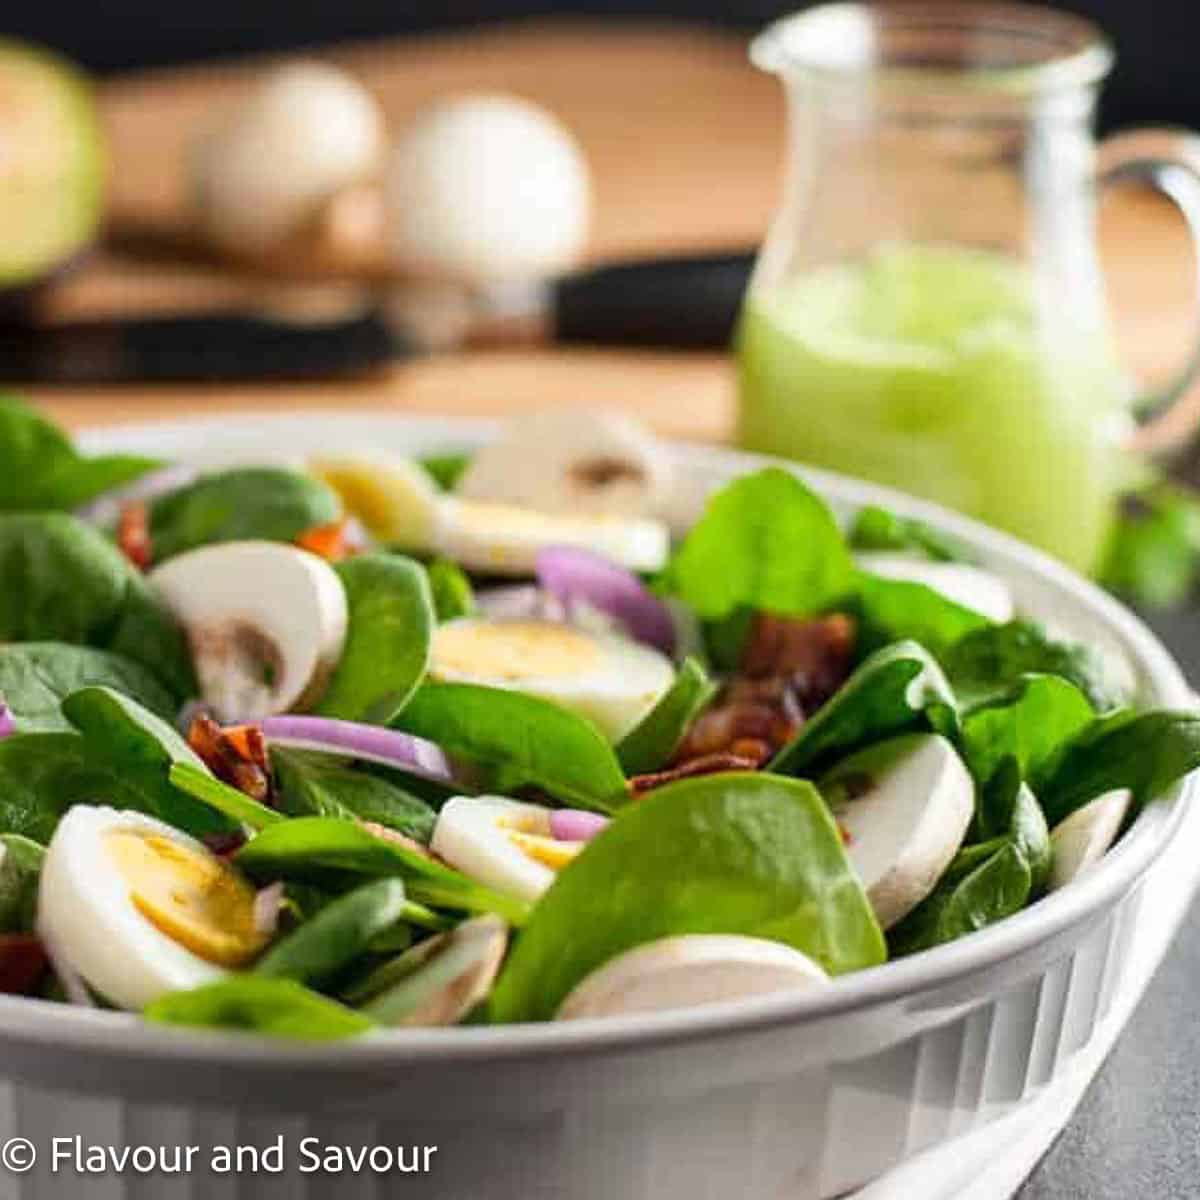 Square image of classic spinach salad with creamy avocado dressing in the background.